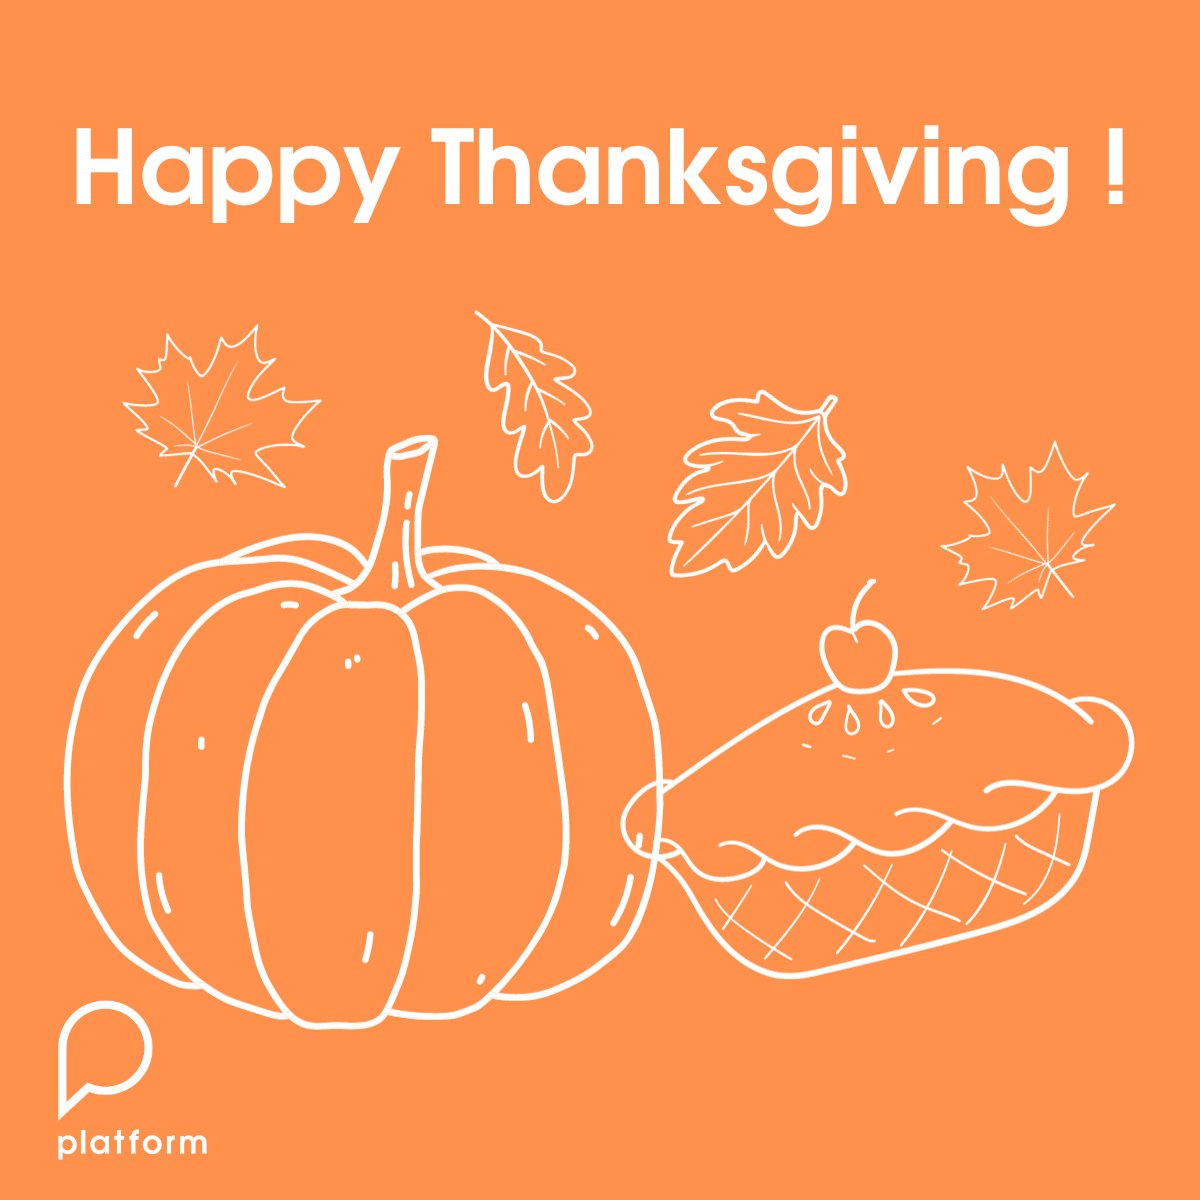 Happy Thanksgiving from all of us at Platform! 🇺🇸